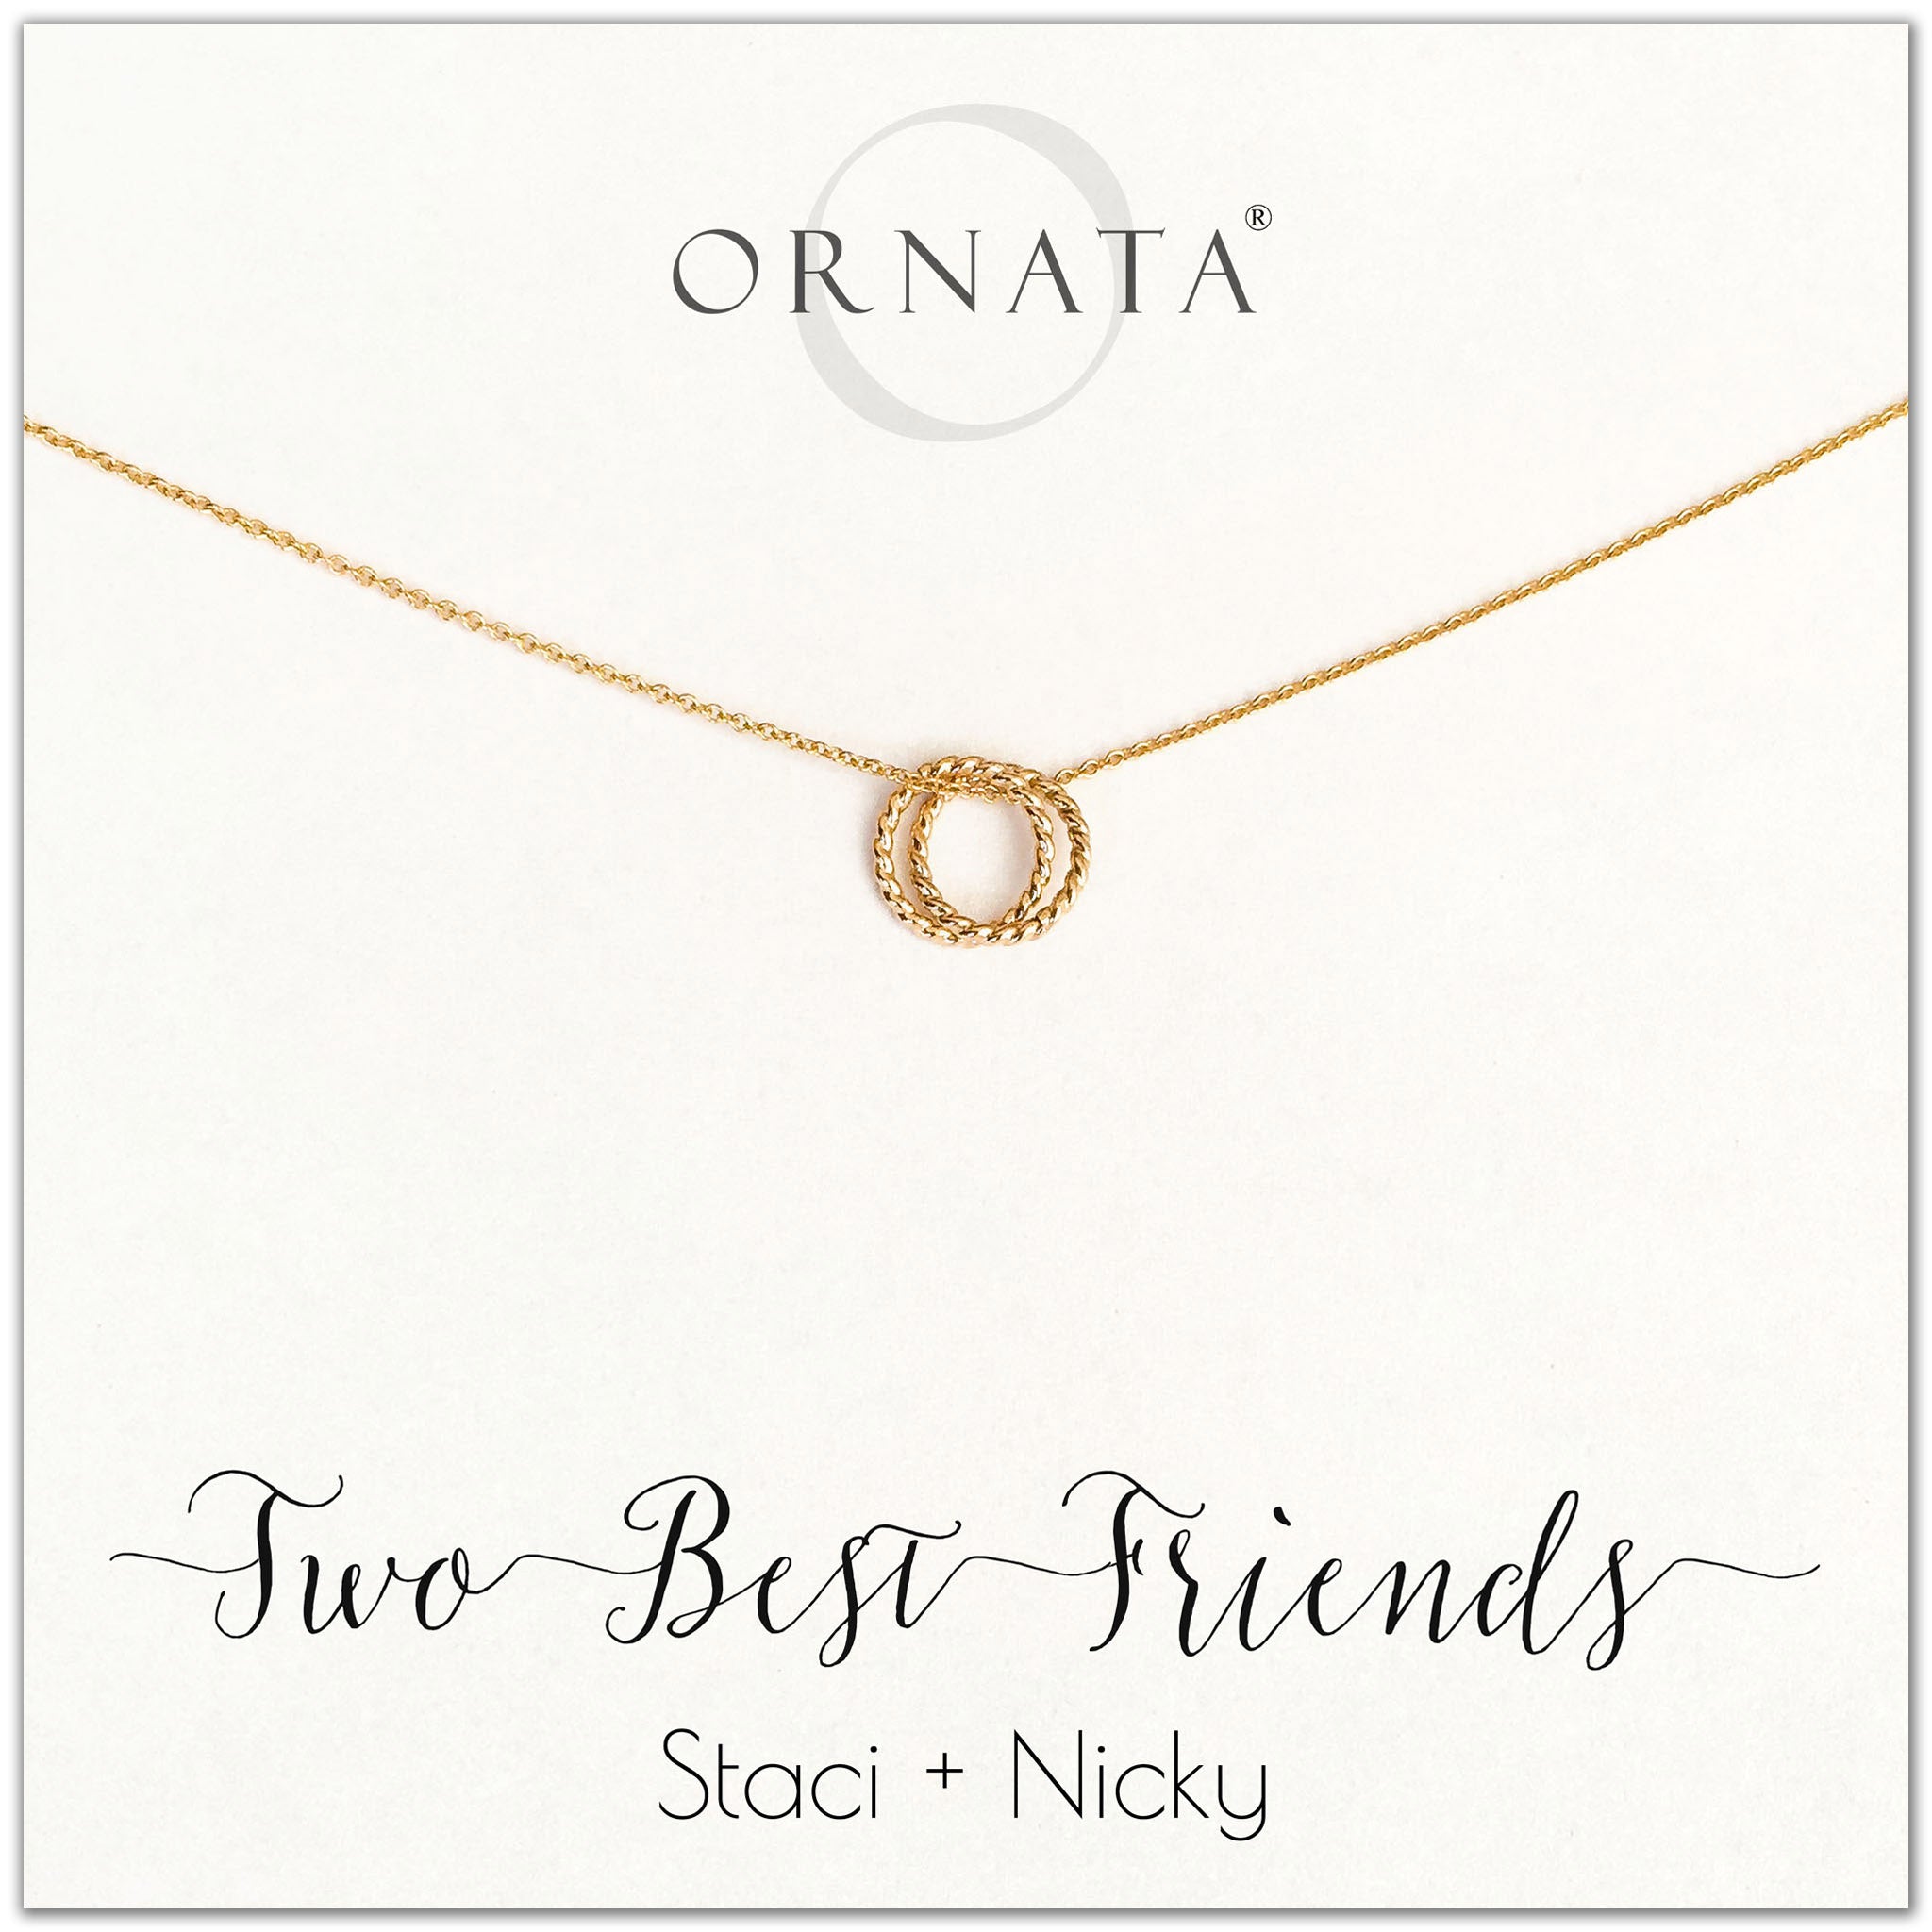 Personalized gold best friend necklaces. Our 14 karat gold filled custom jewelry is a perfect gift for best friends or sisters